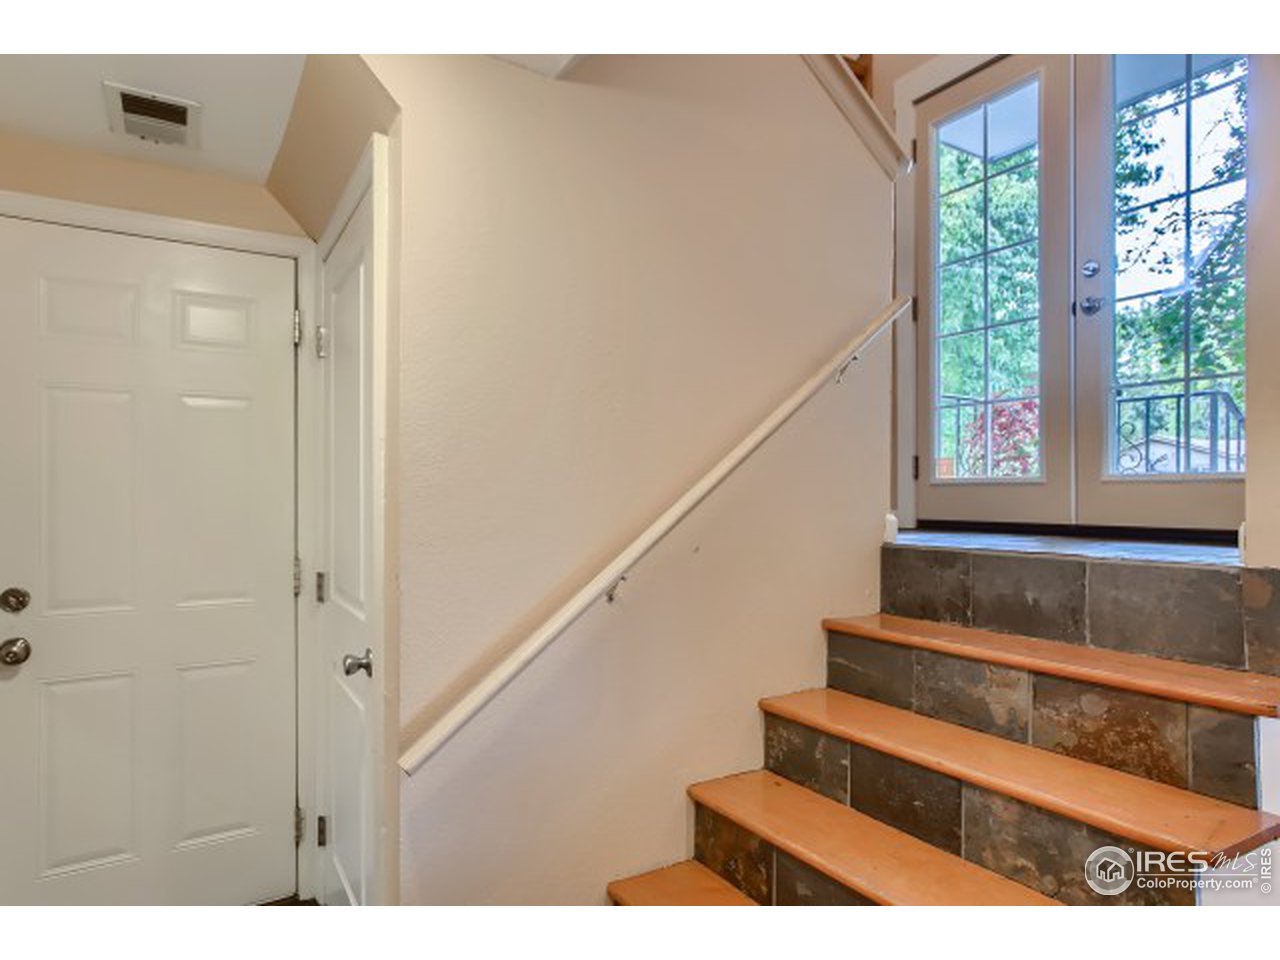 Stairs to lower level, and garage door.